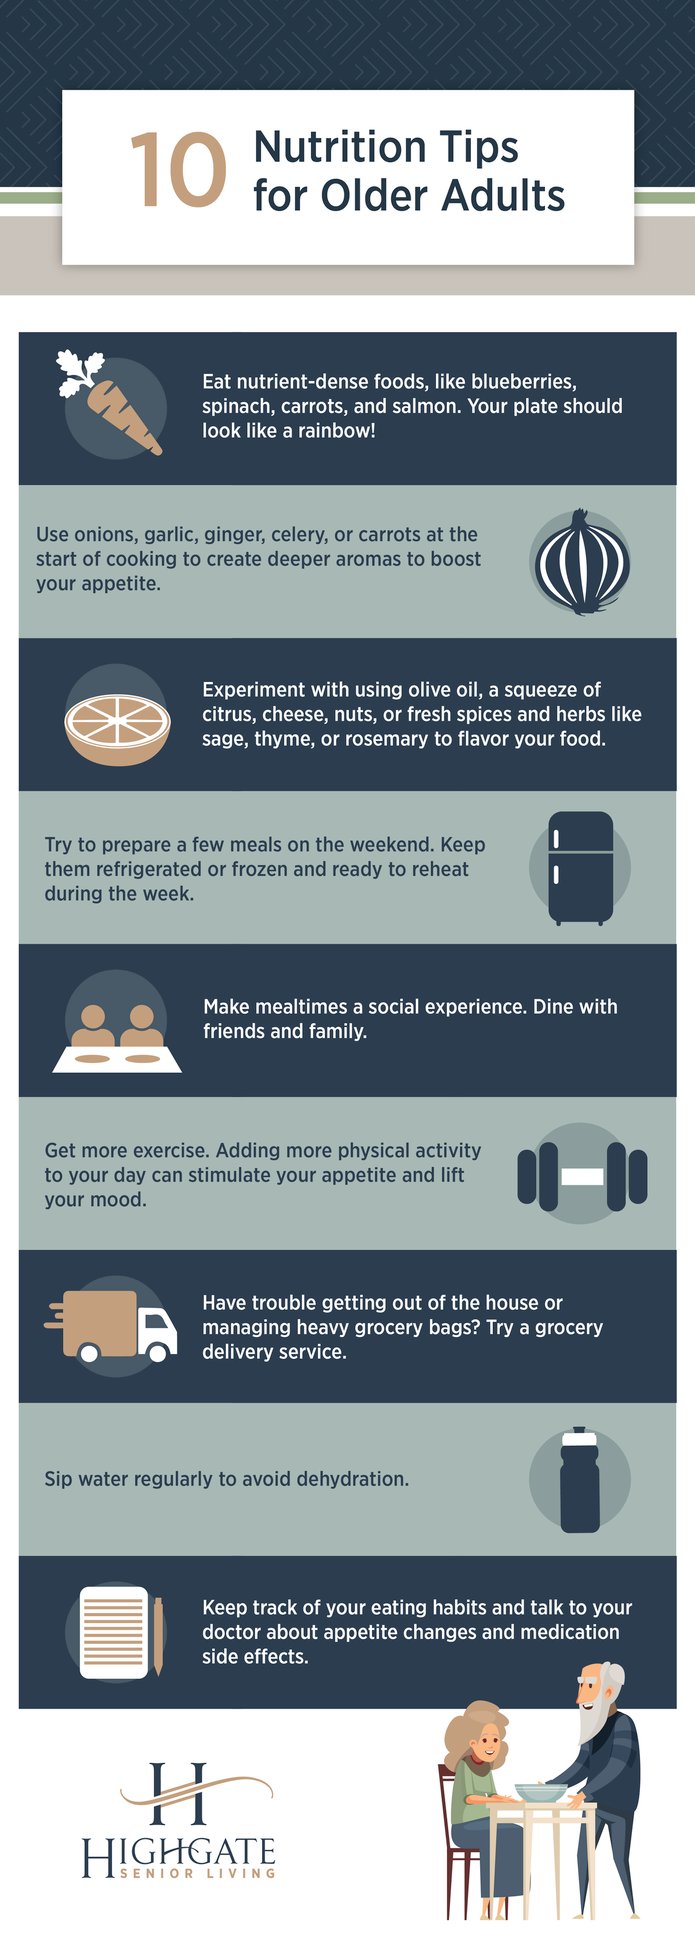 HGE_10NutritionalTips_Infographic